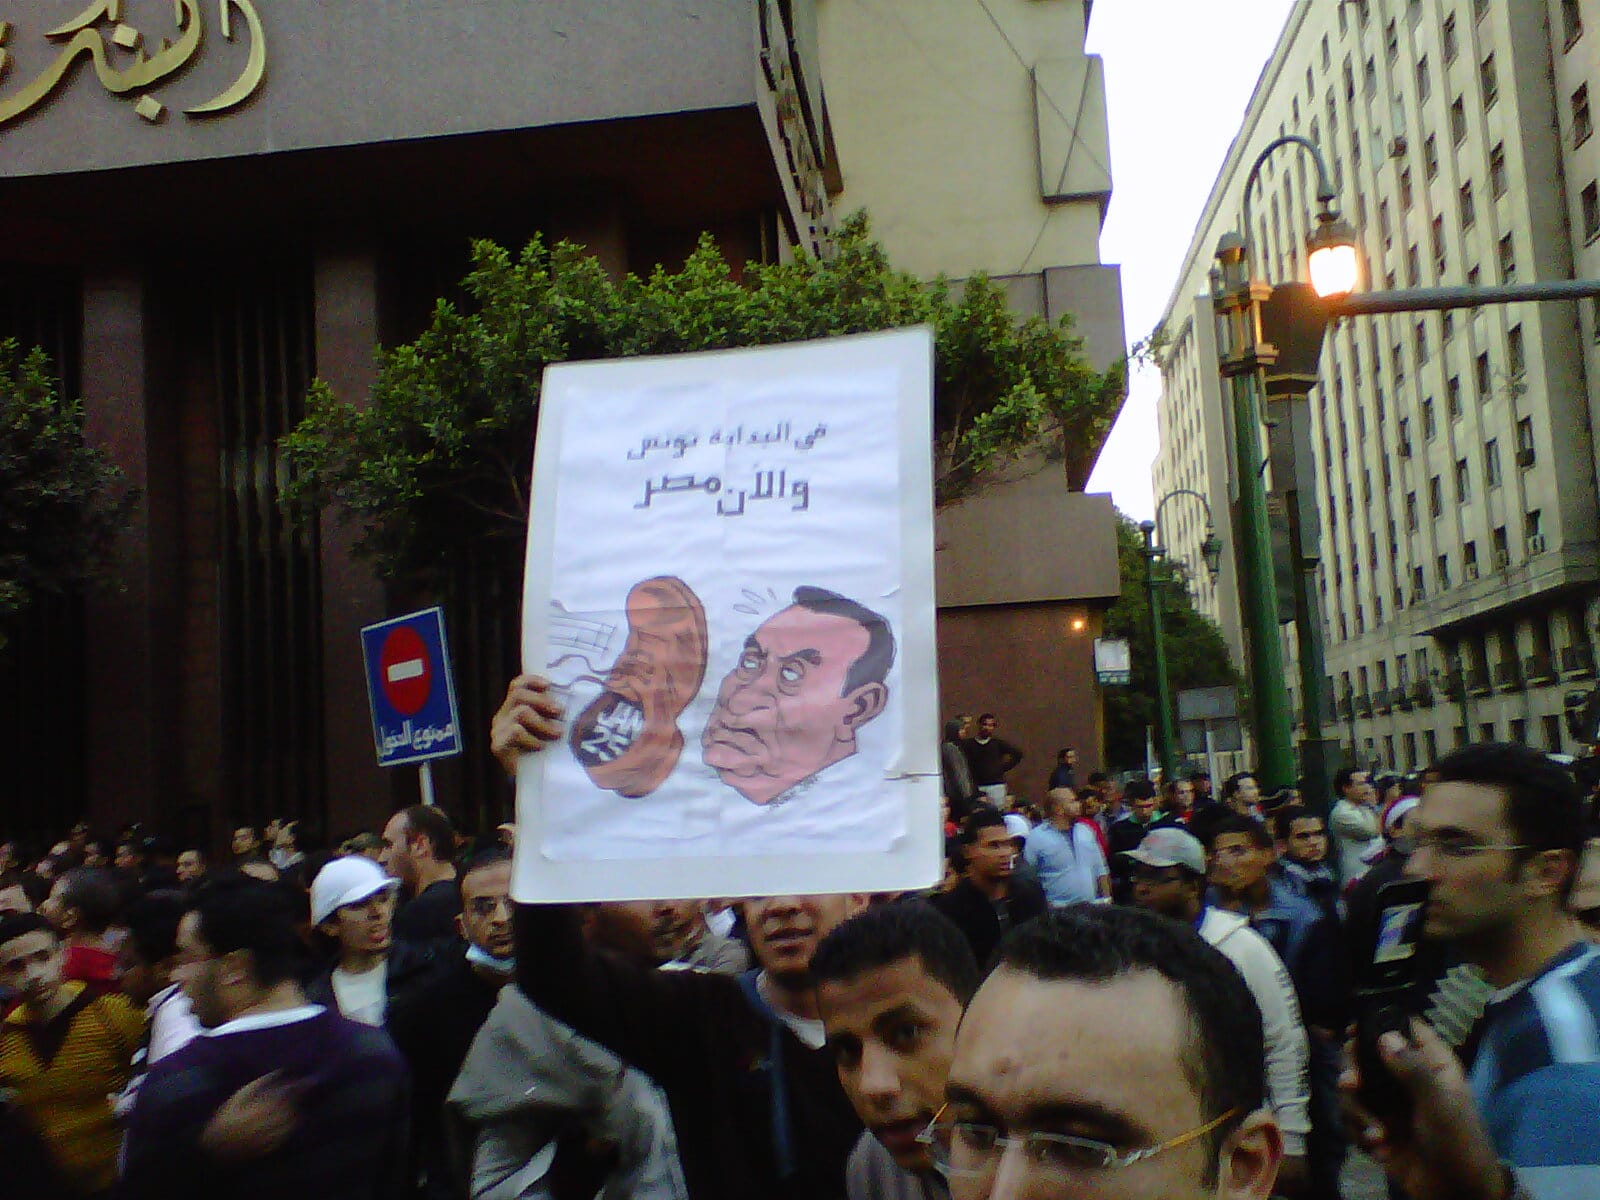 Crowd where a sign with a boot being thrown at Hosni Mubarak is displayed. Author of drawing is Brazilian cartoonist Carlos Latuff. Photo: Taken 25 January 2011 by Muhammad Ghafari from Giza, Egypt. (CC BY 2.0).